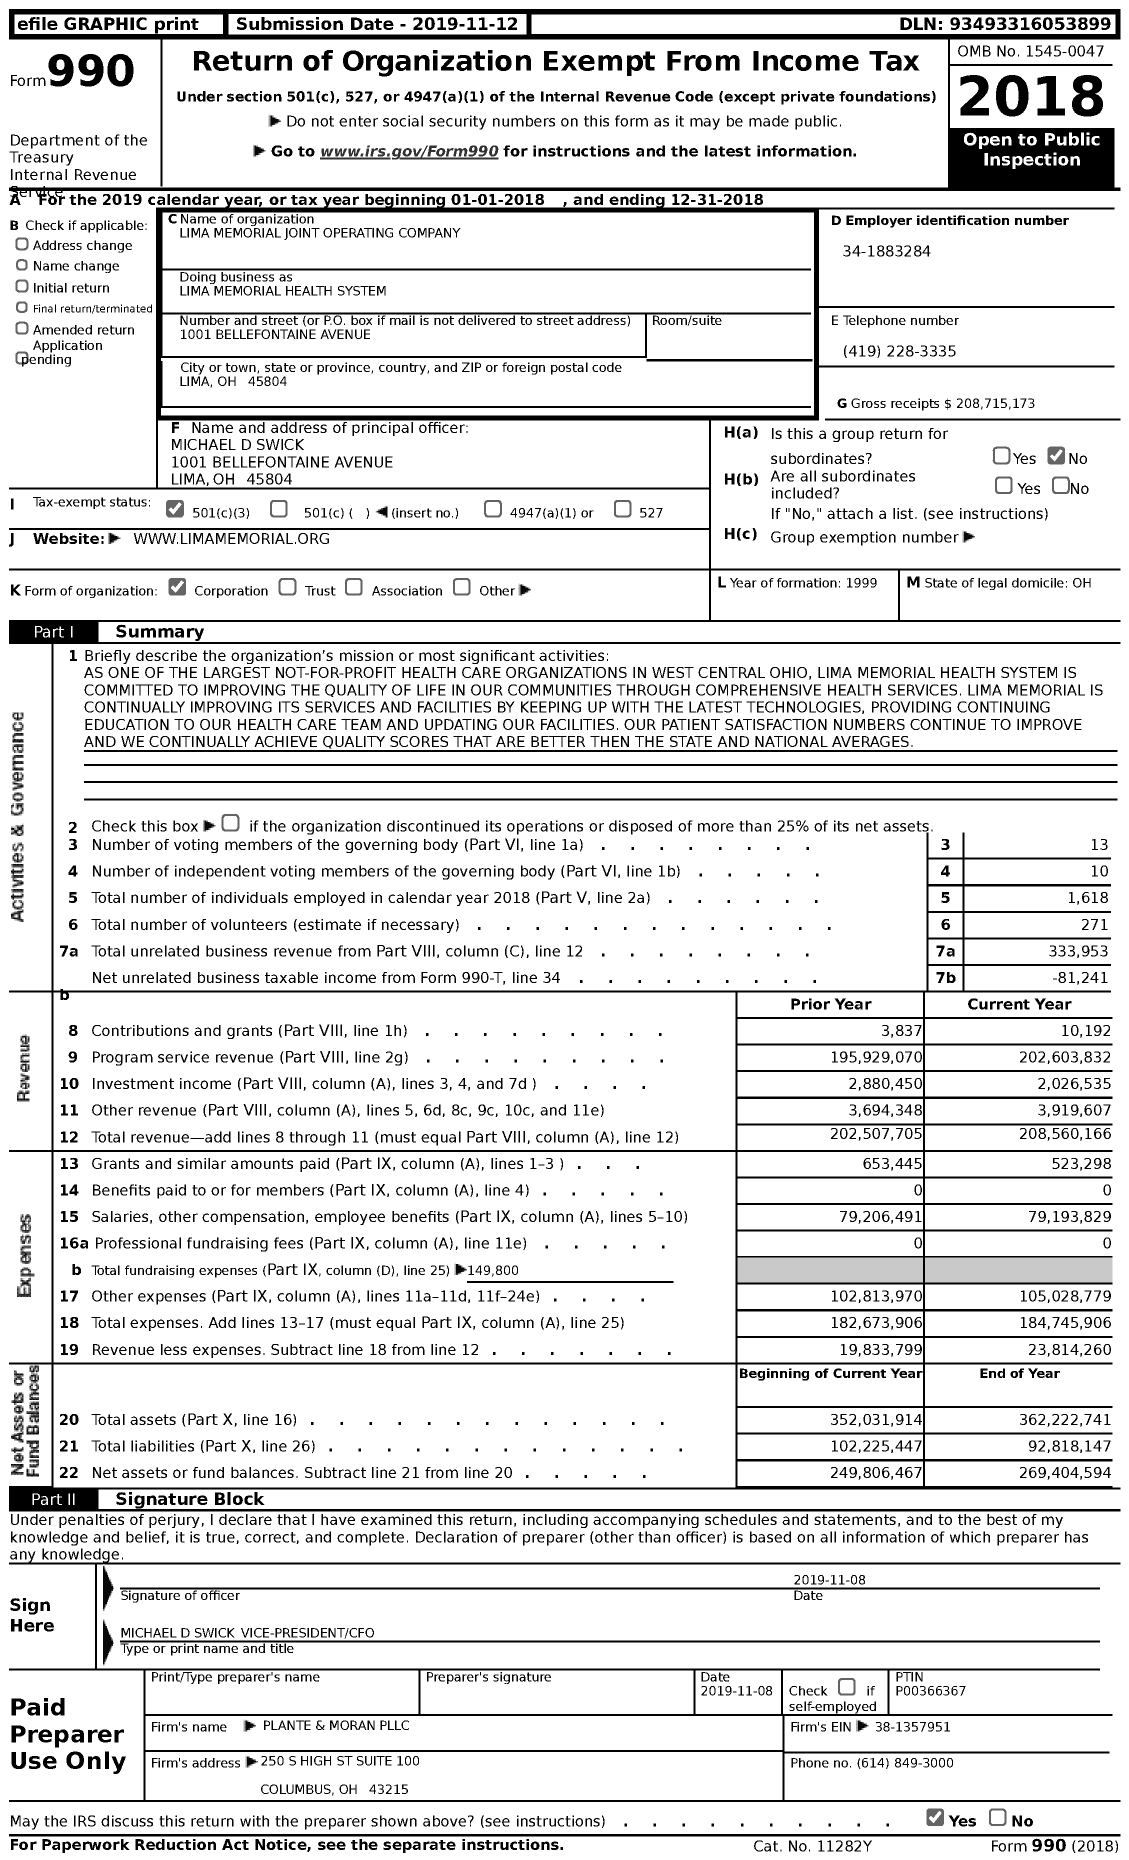 Image of first page of 2018 Form 990 for Lima Memorial Health System / Lima Memorial Joint Operating Company